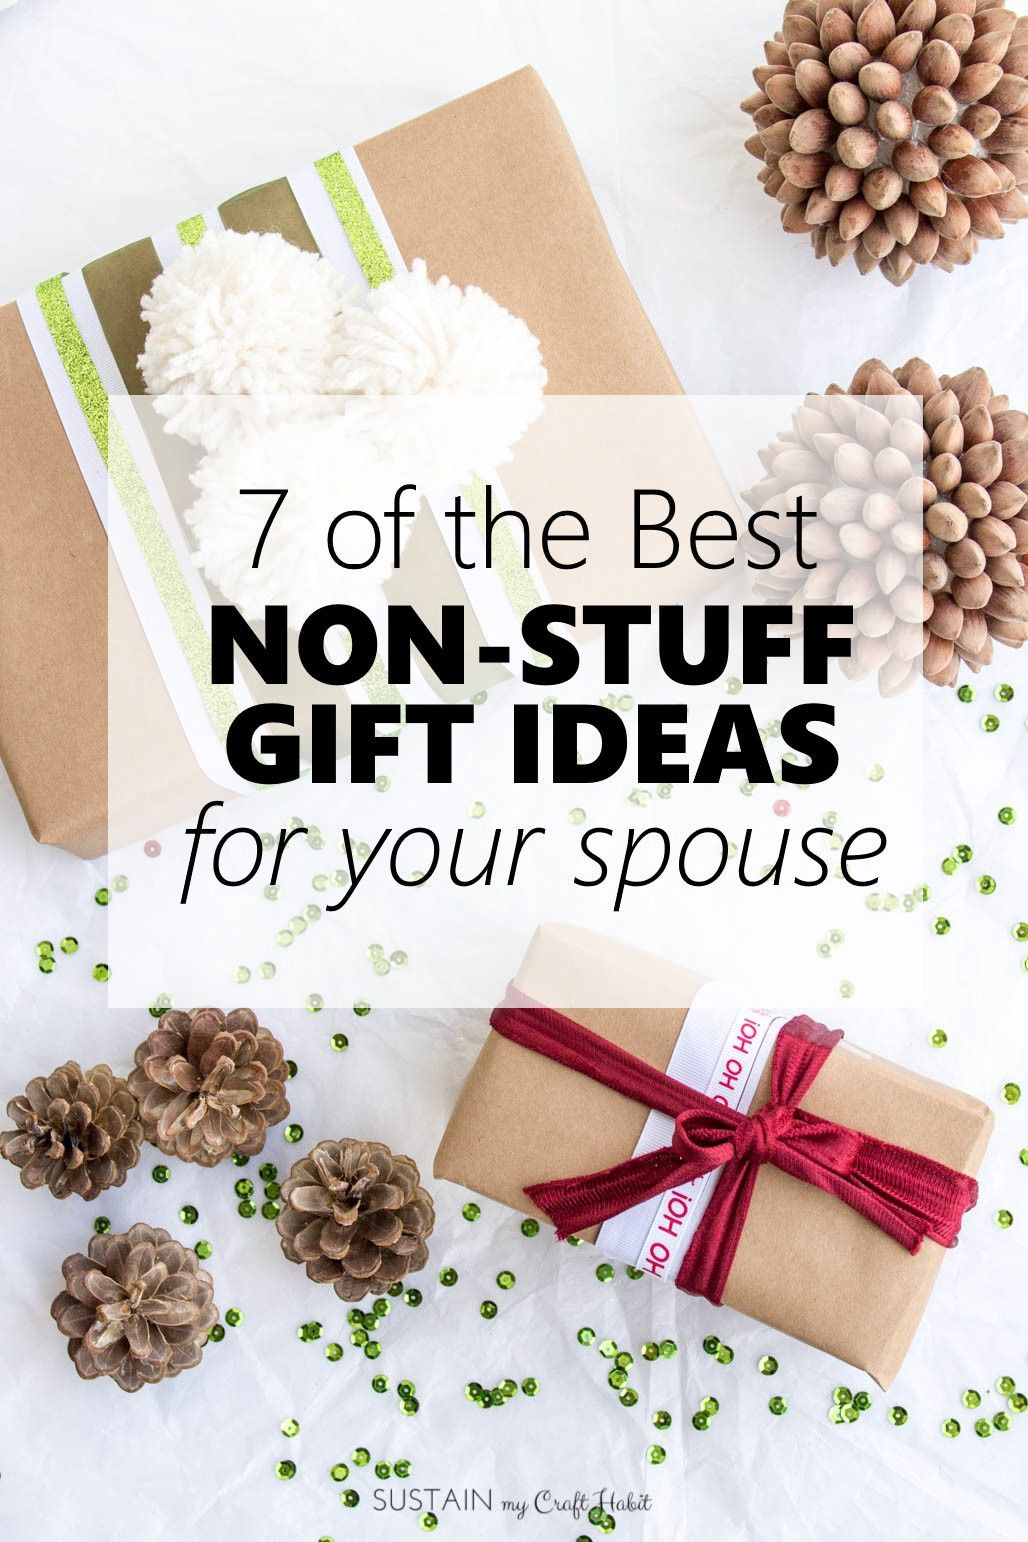 DIY Christmas Gift For Husband
 7 of the Best Non Stuff Gift Ideas for your Spouse